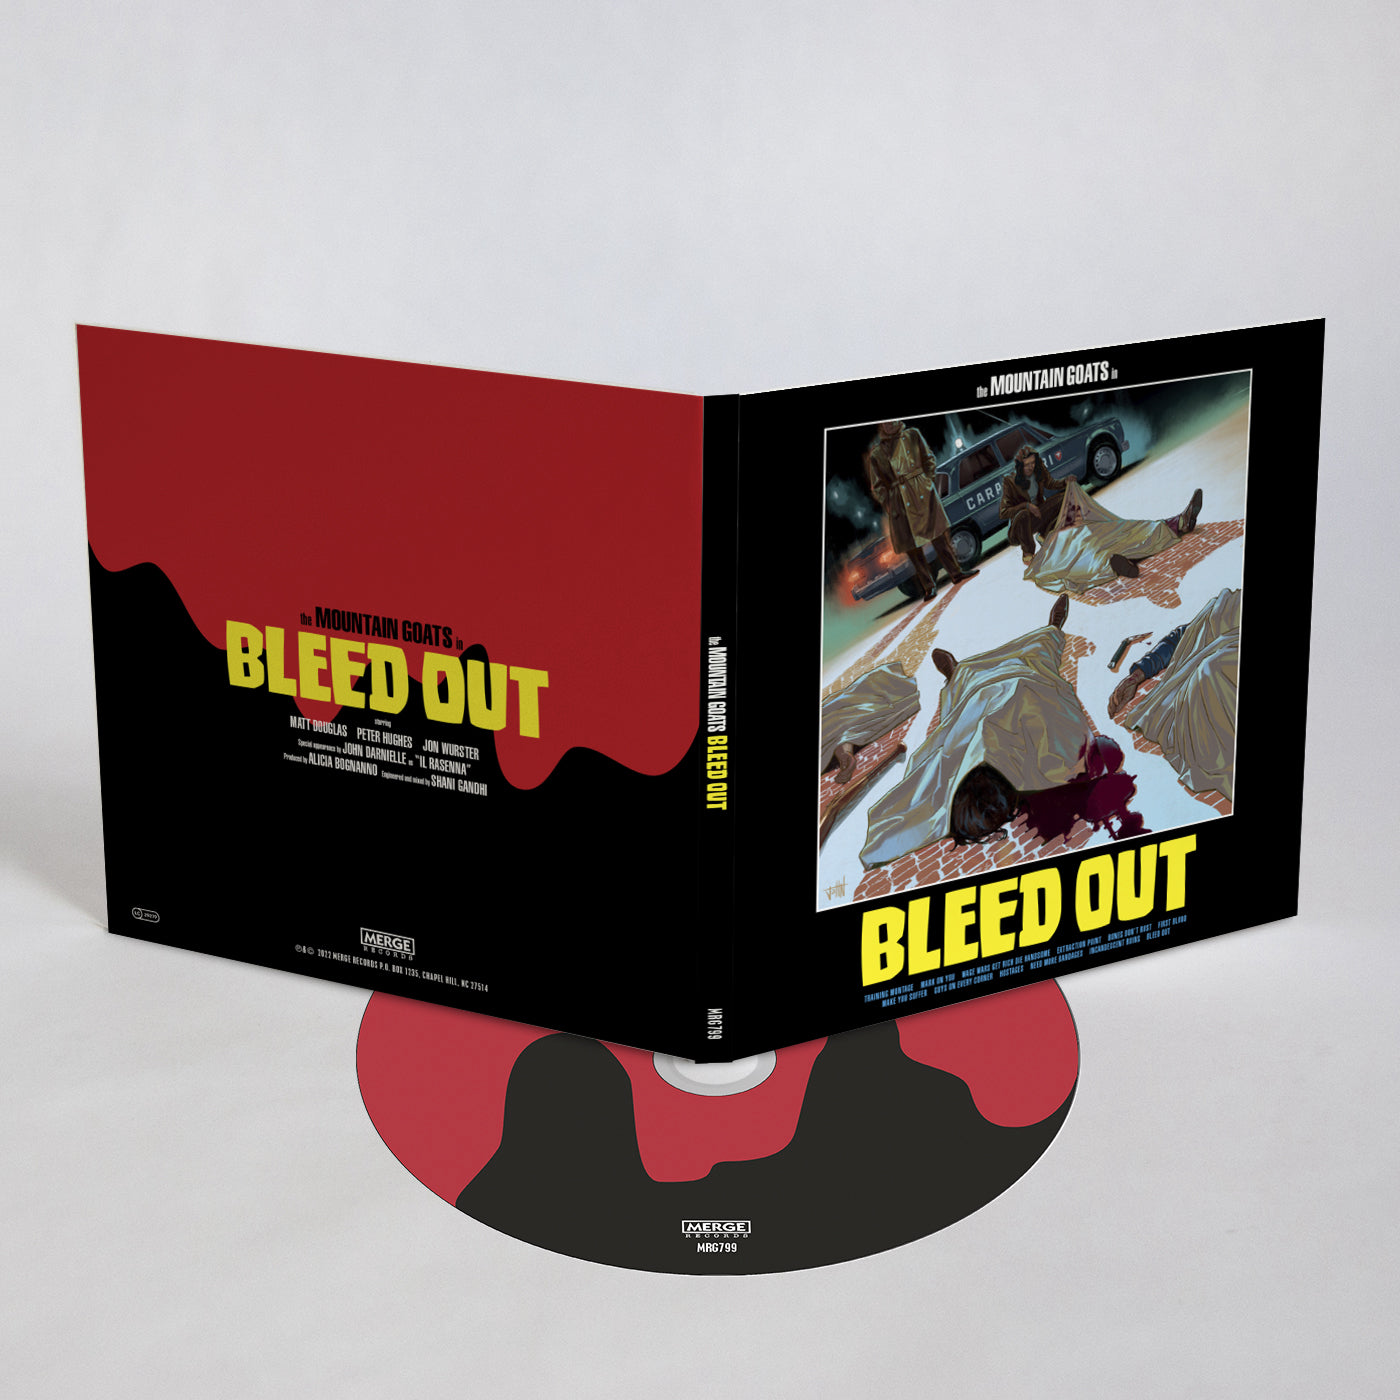 The Mountain Goats: Bleed Out CD